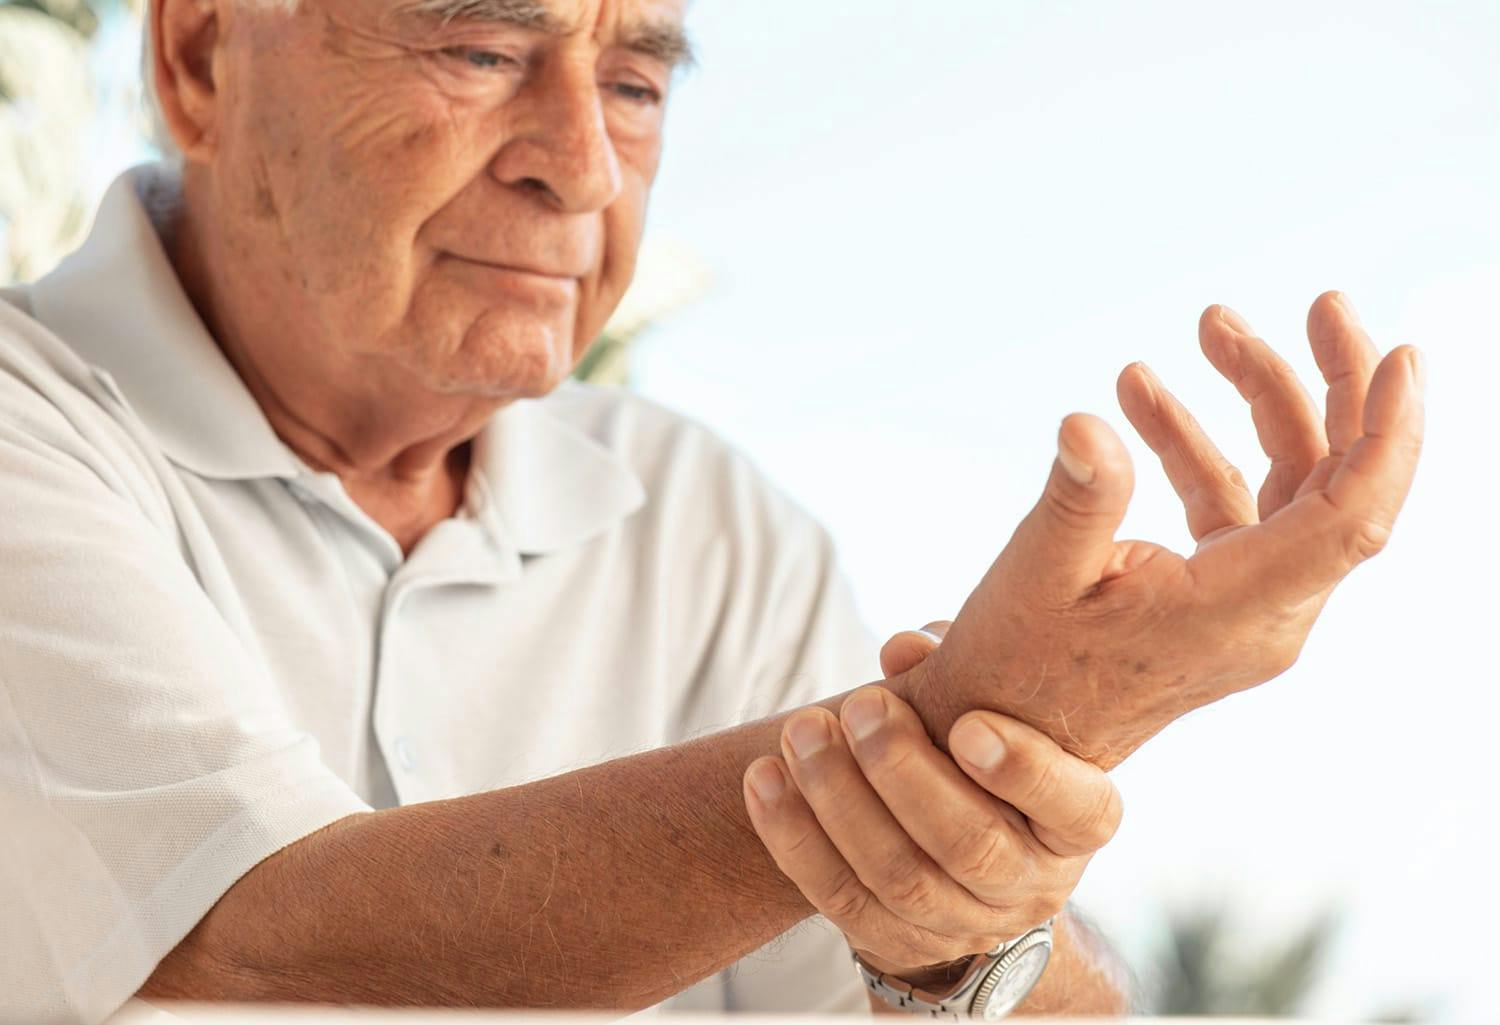 Man holding his wrist in pain